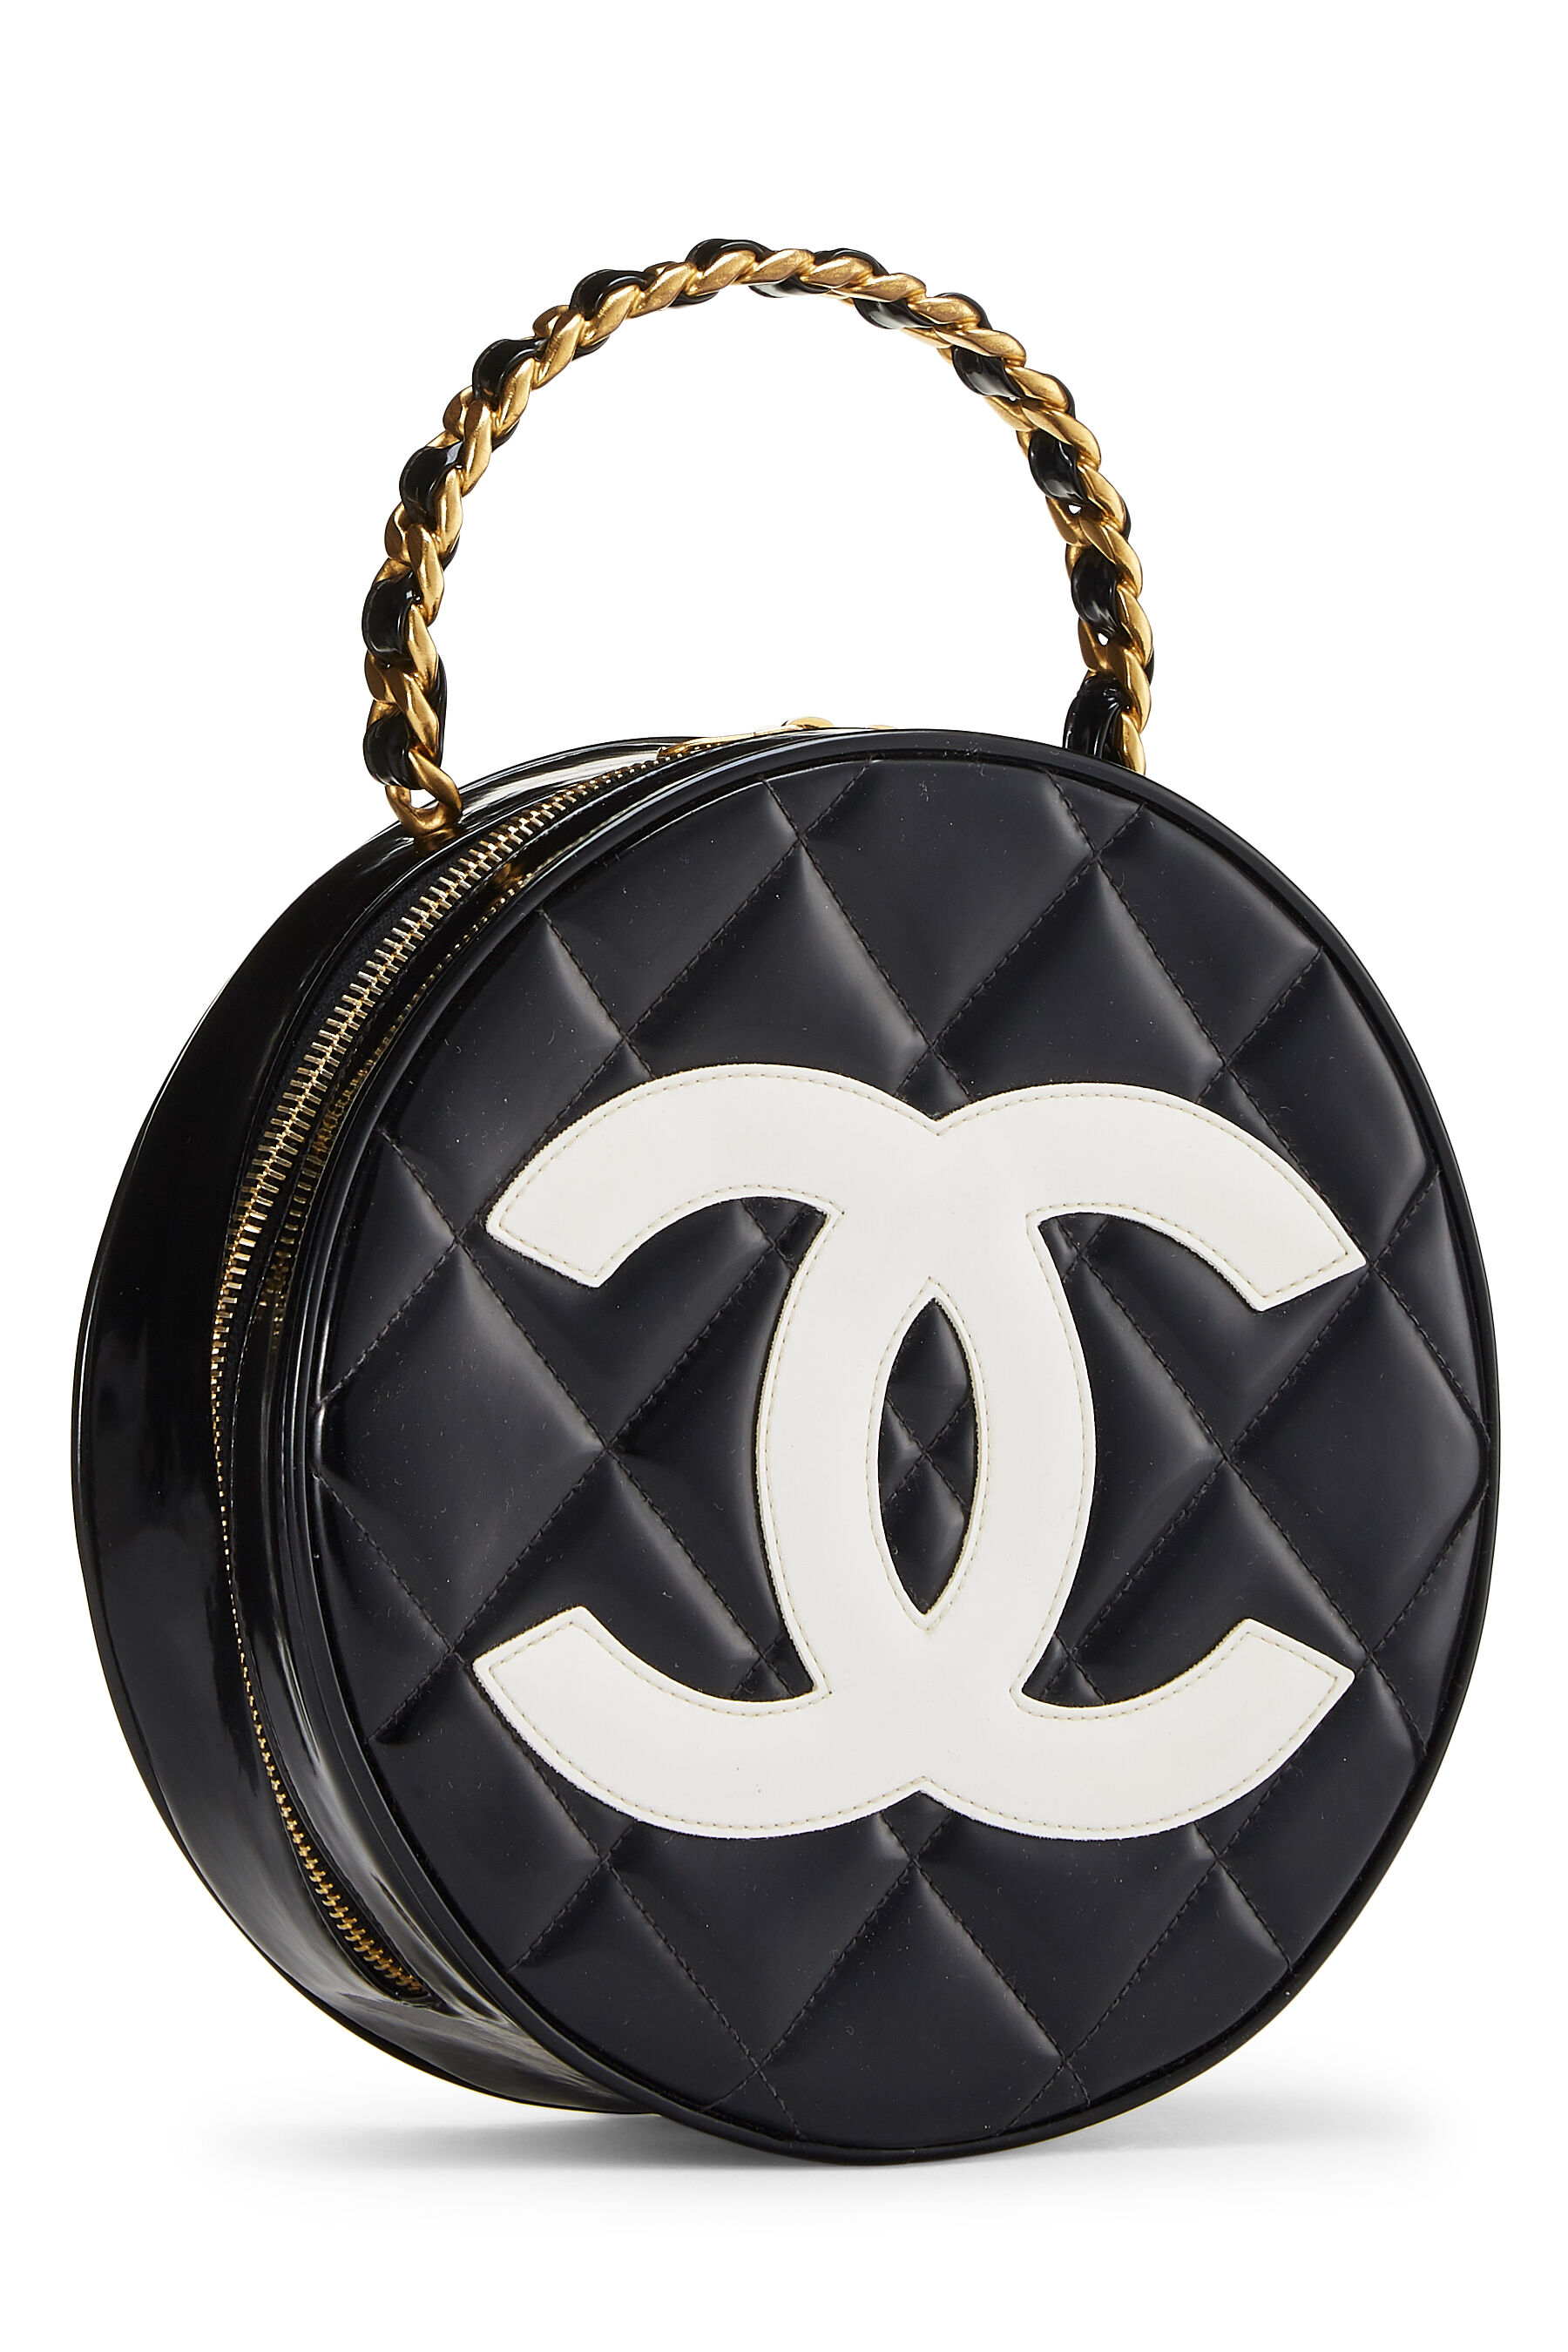 Chanel - Black Quilted Patent Leather Round 'CC' Bag